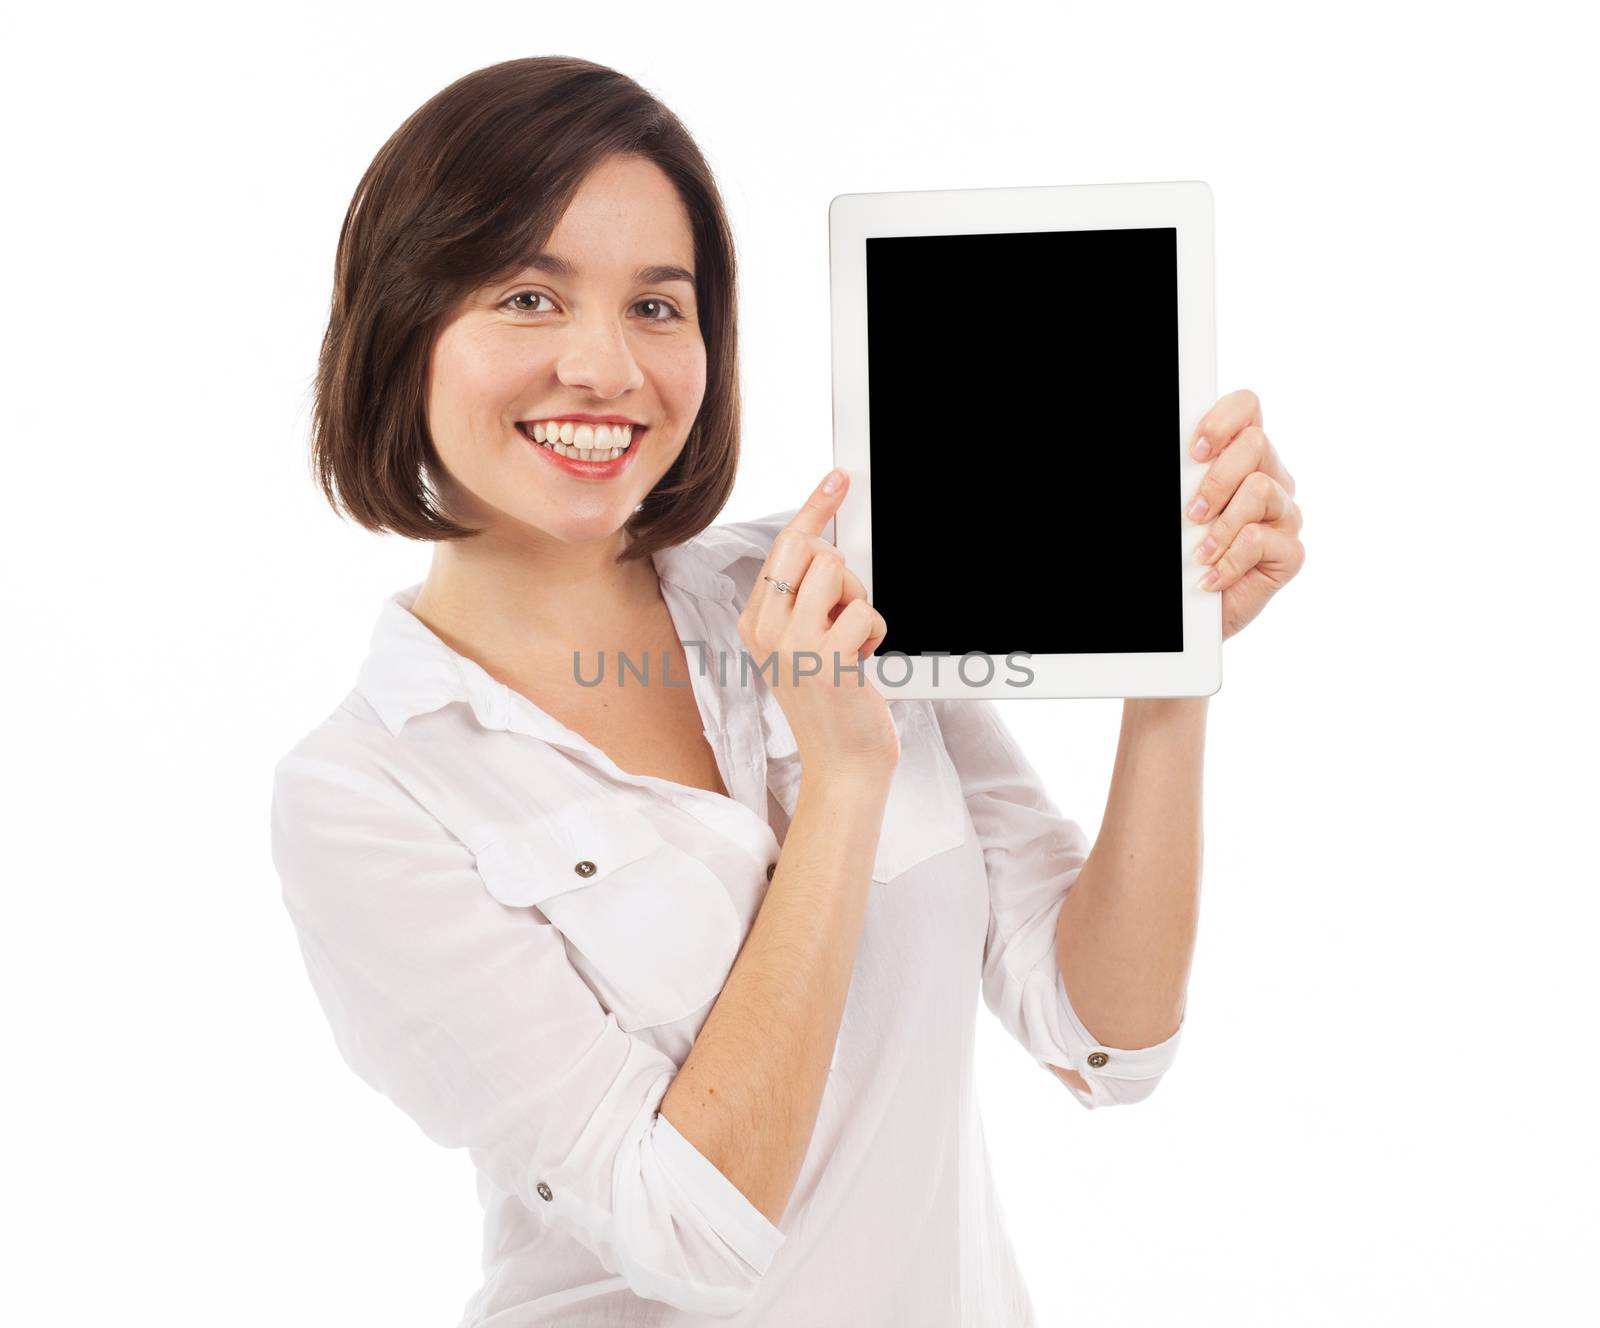 Smiling woman holding and showing a blank touchpad, communication concept, isolated on white